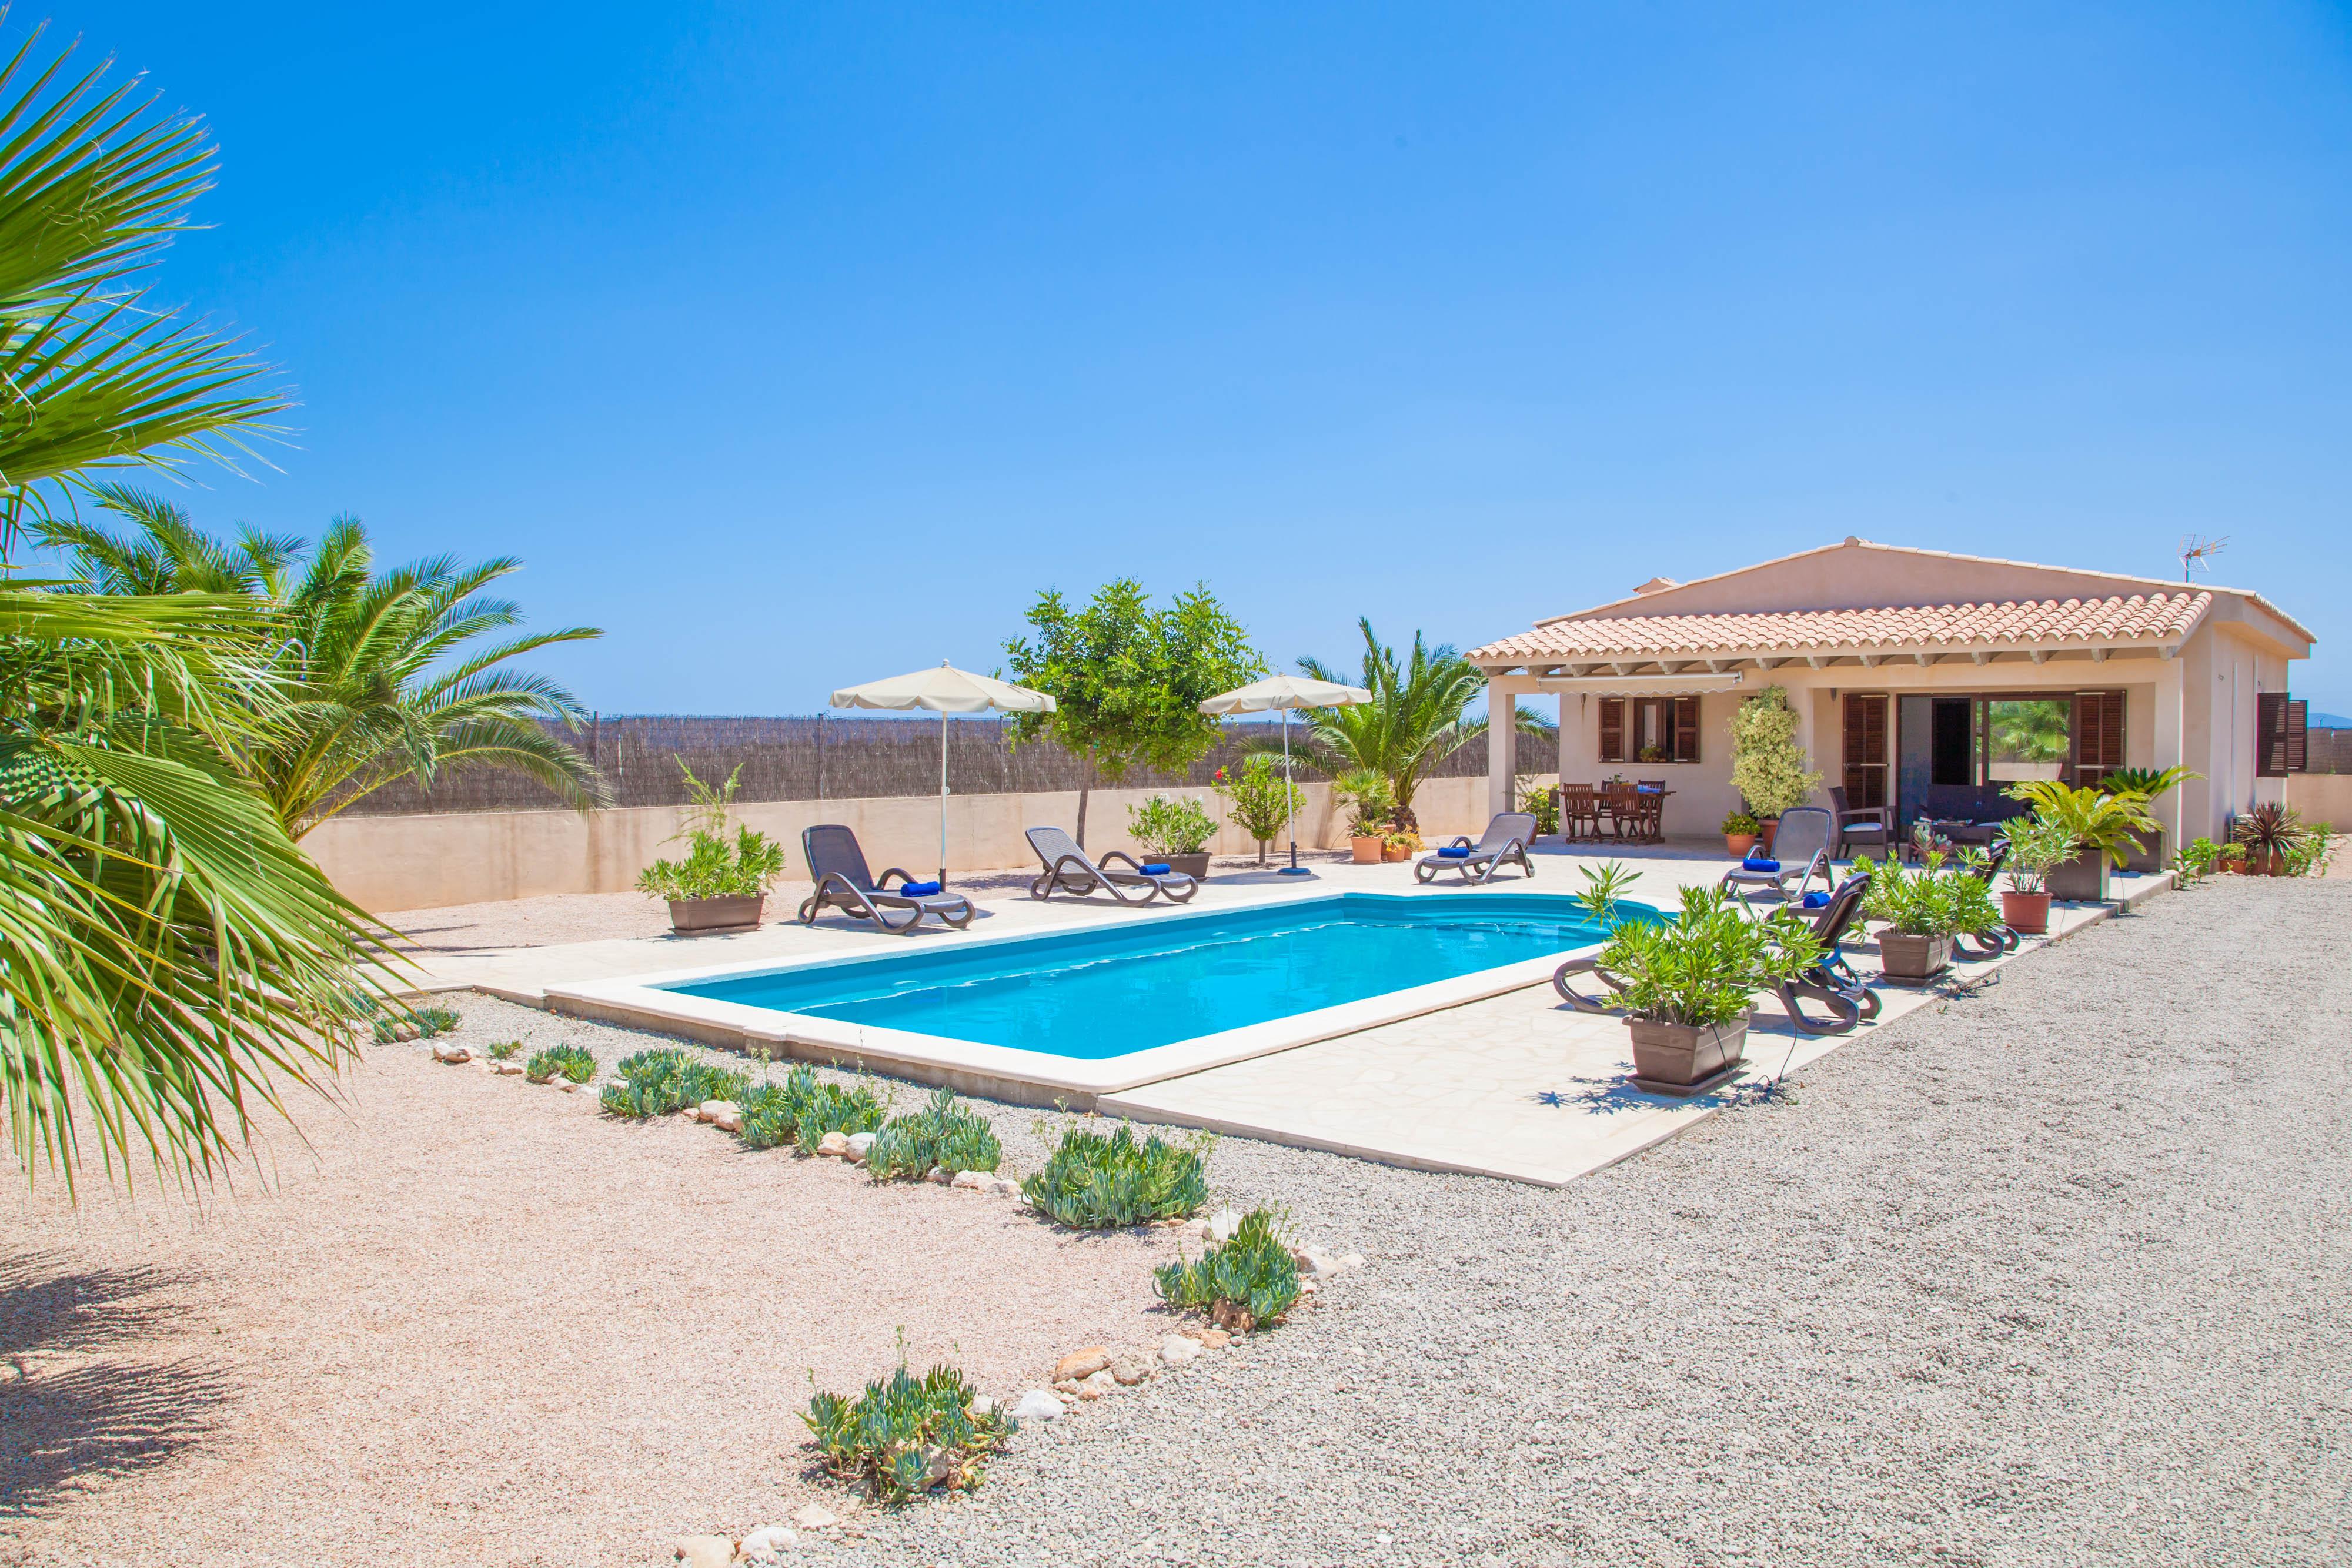 Property Image 1 - CAN MELIS - Wonderful villa with private pool located in rural and quiet surroundings. Free WiFi